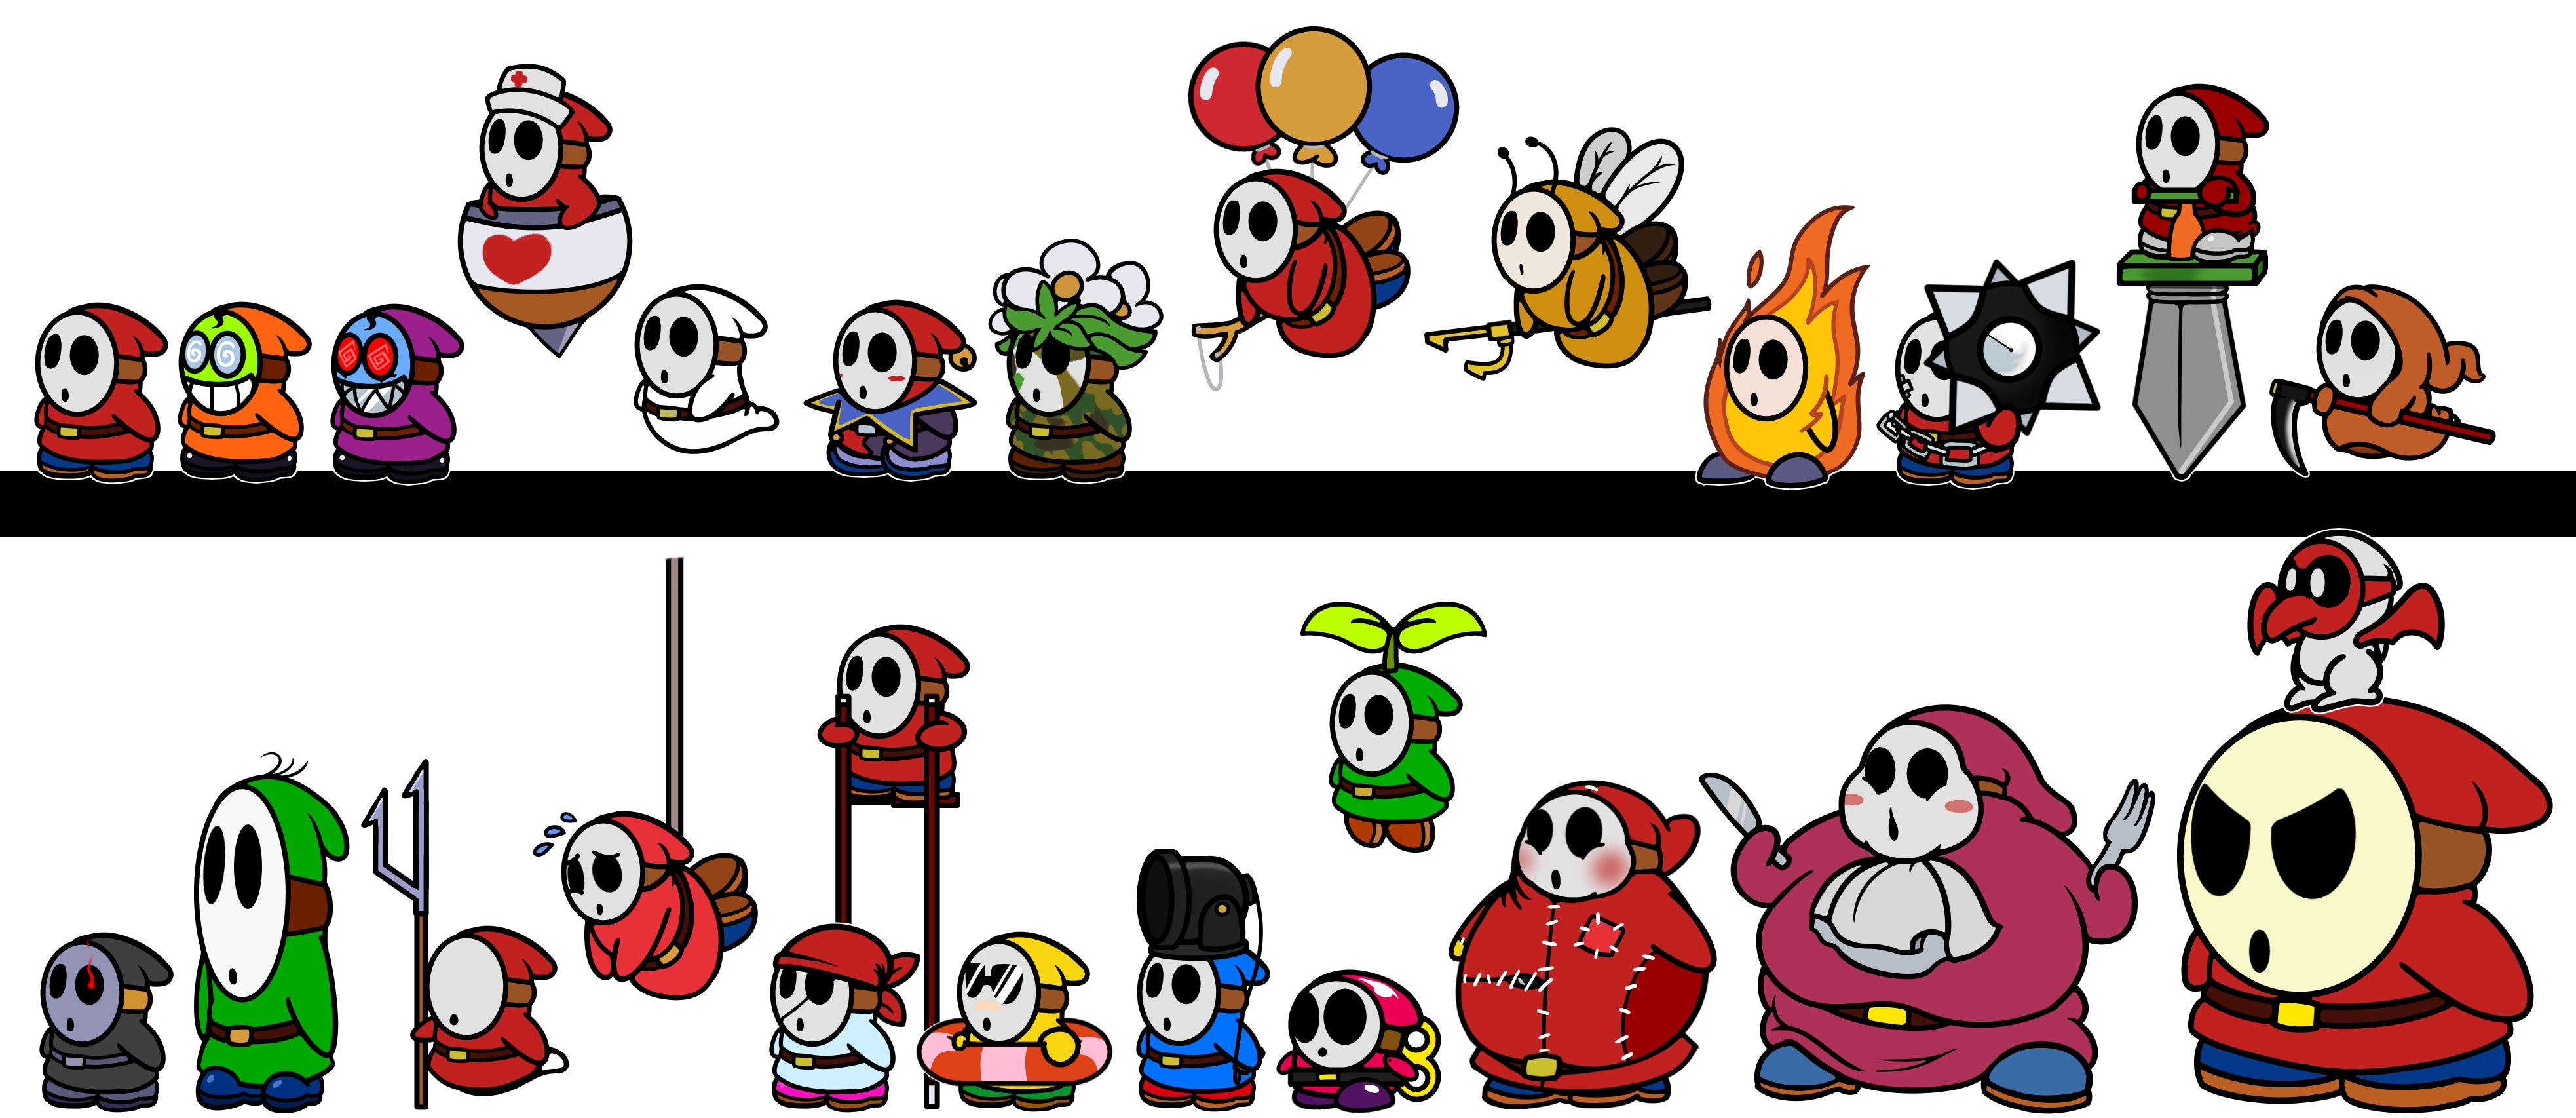 How To Draw A Shy Guy Follow Along And Learn How To Draw Shy Guy From Mario